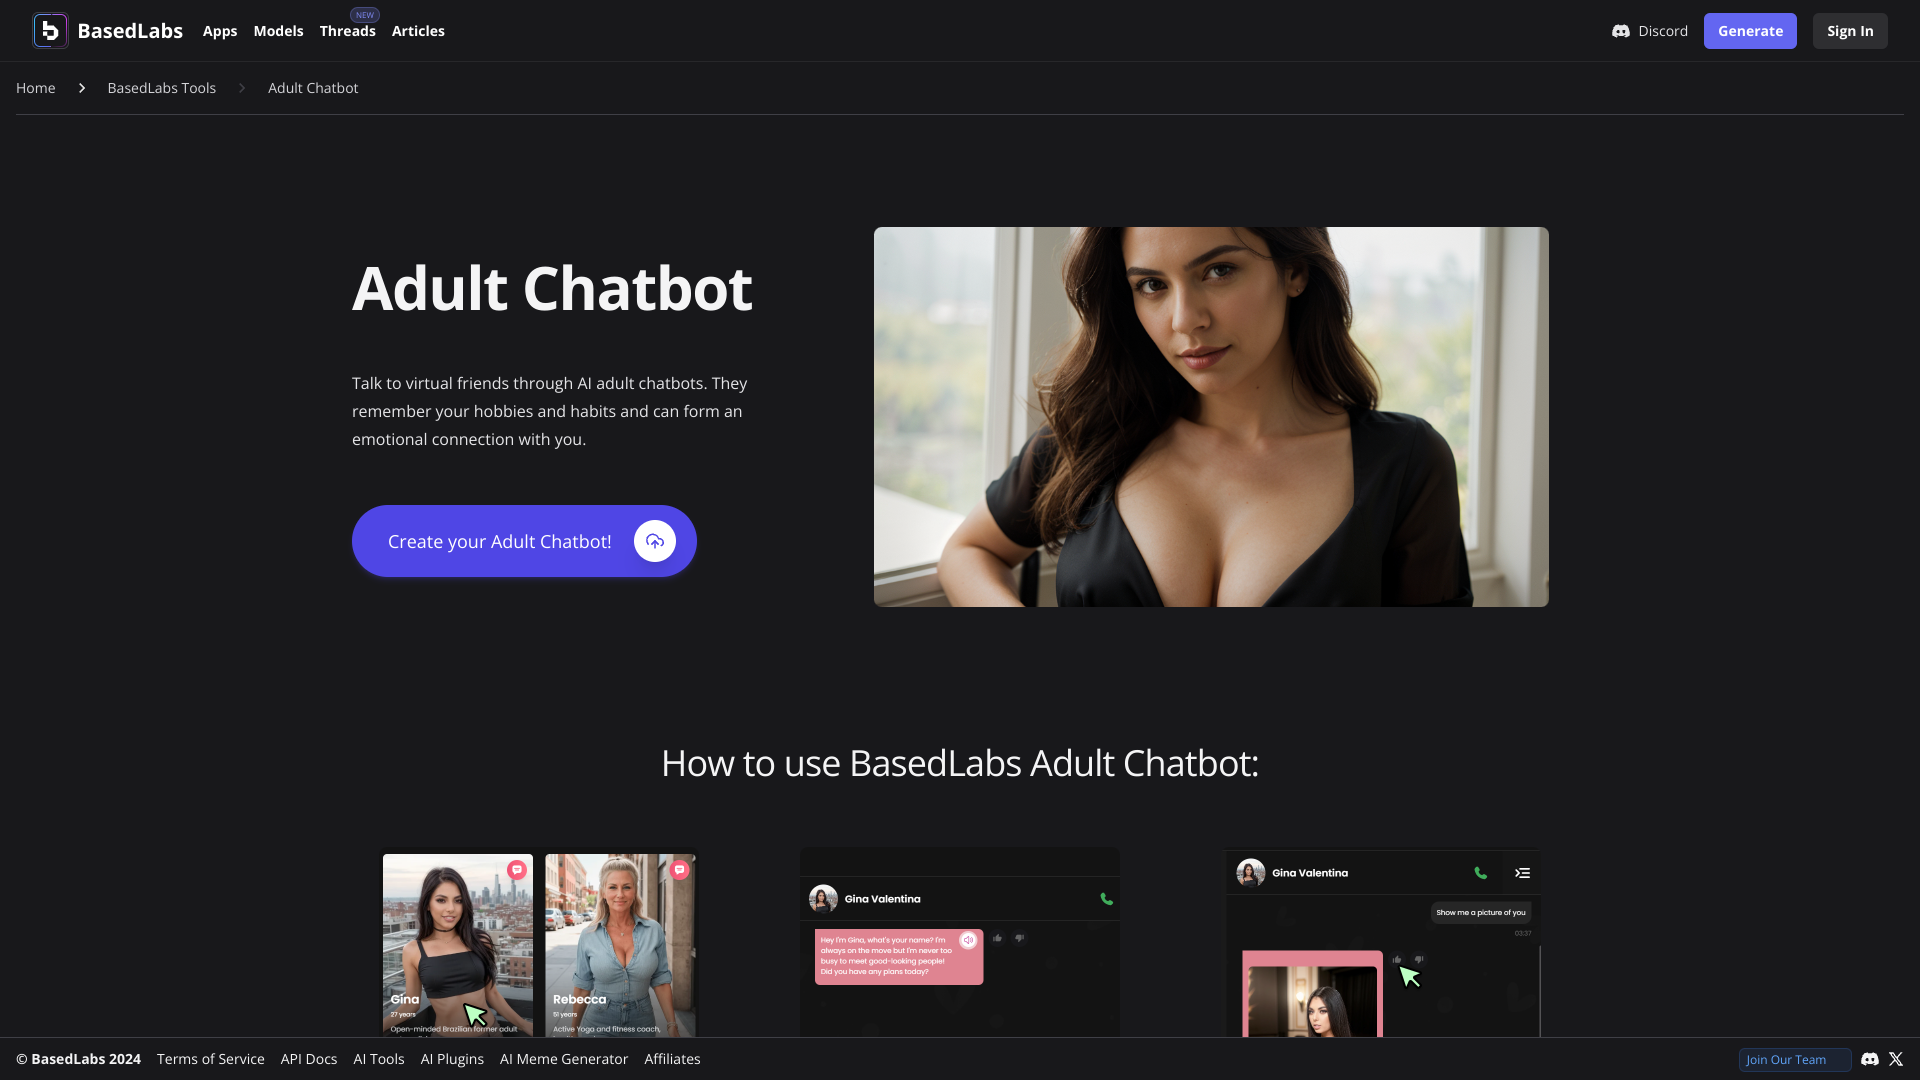 Display image for Adult Chatbot